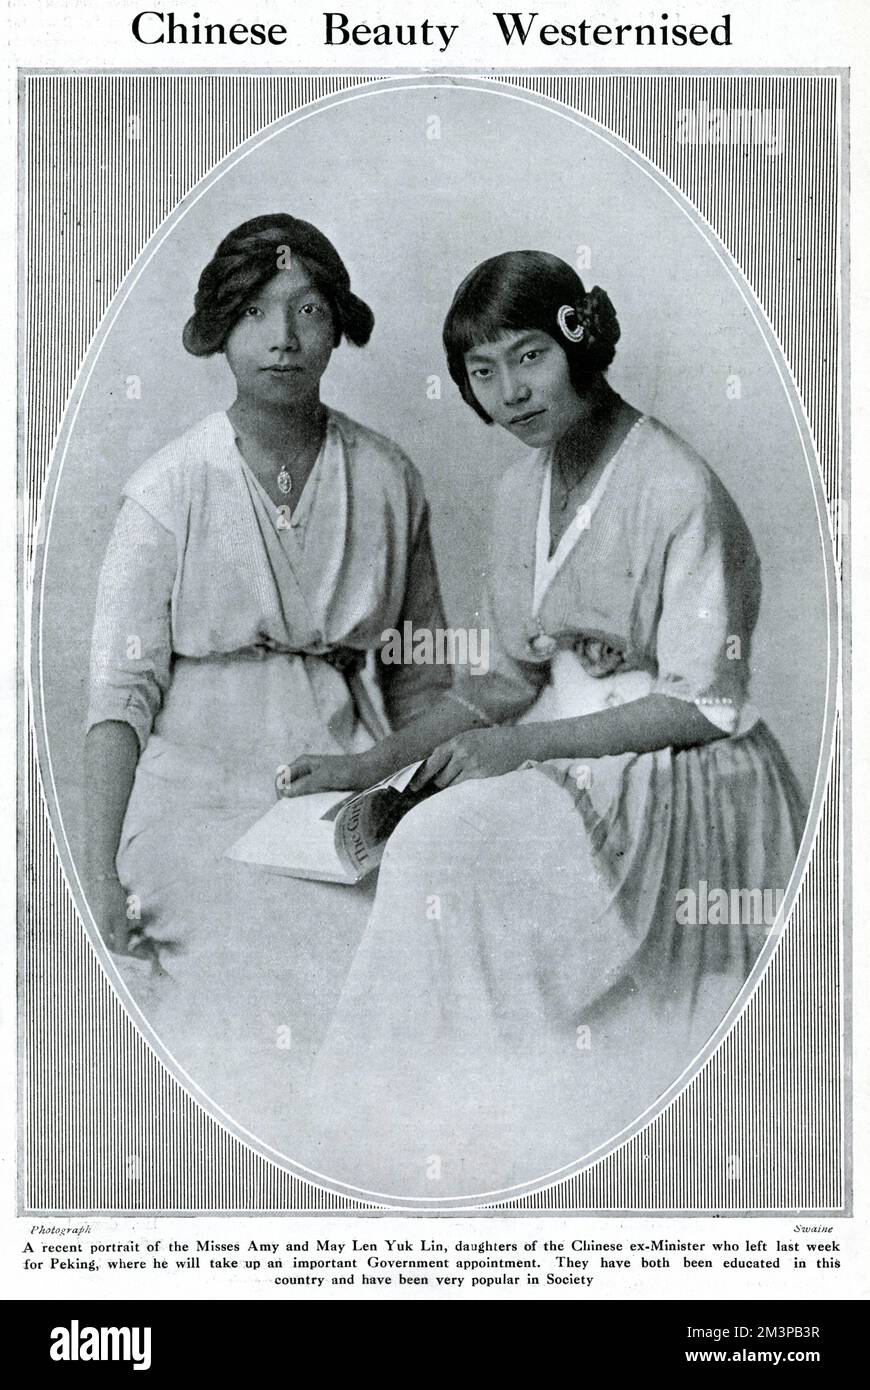 Two young Chinese women in western costume: Misses Amy and May Leu Yuk Lin, daughters of the Chinese ex-Minister, pictured in 1915. The Bystander notes that these ladies were educated in Britain, and proved very popular in Society. Stock Photo